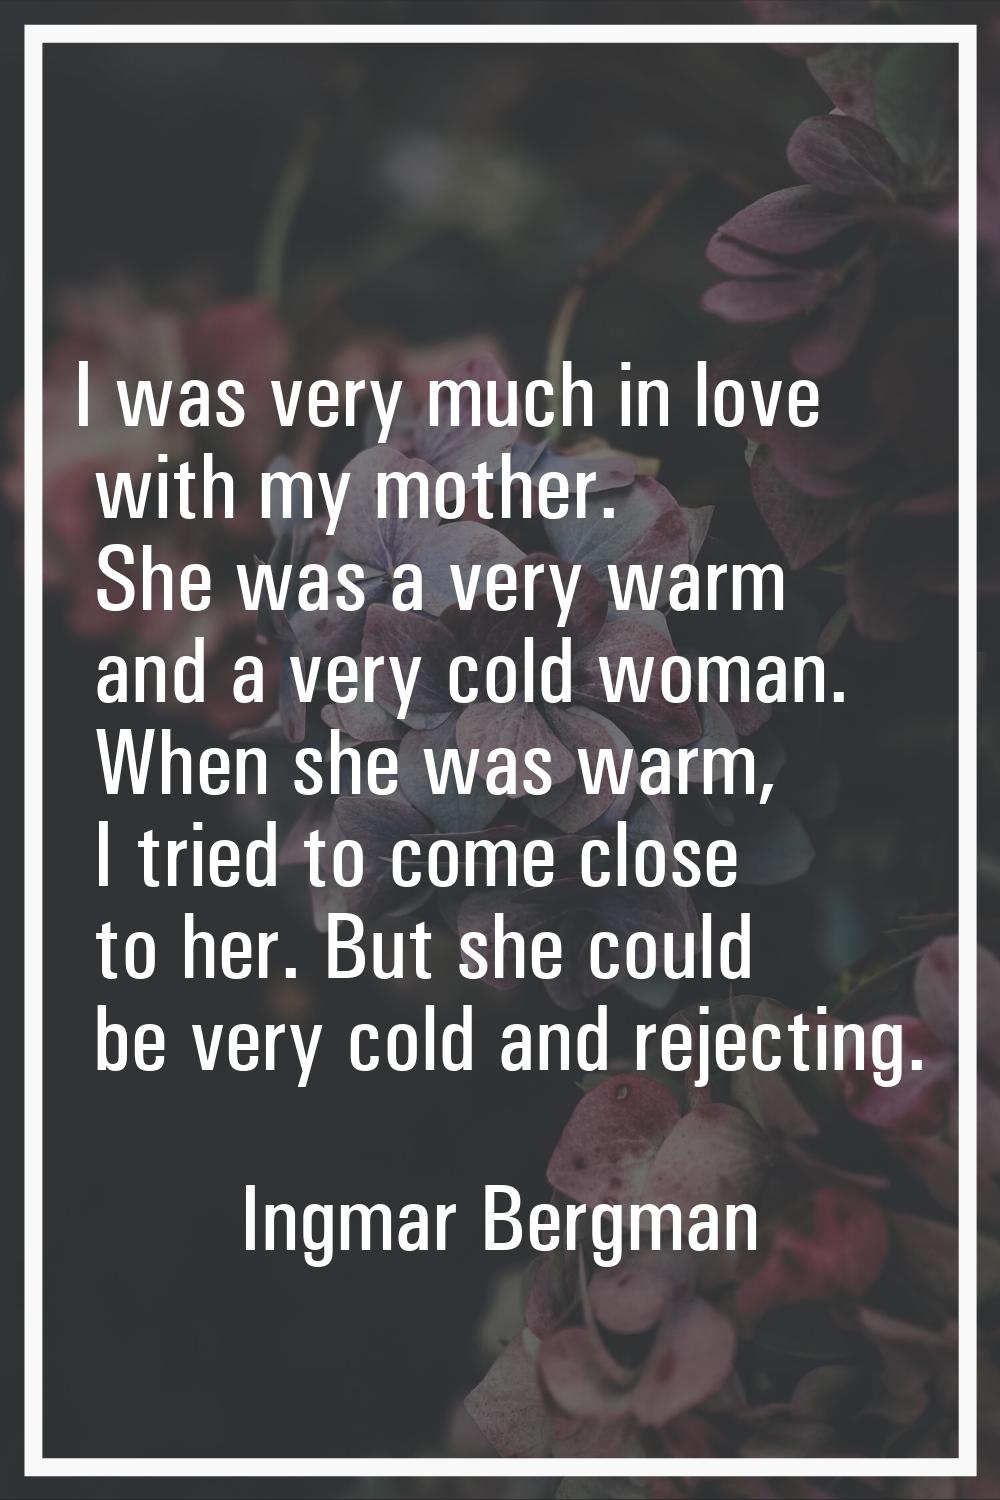 I was very much in love with my mother. She was a very warm and a very cold woman. When she was war